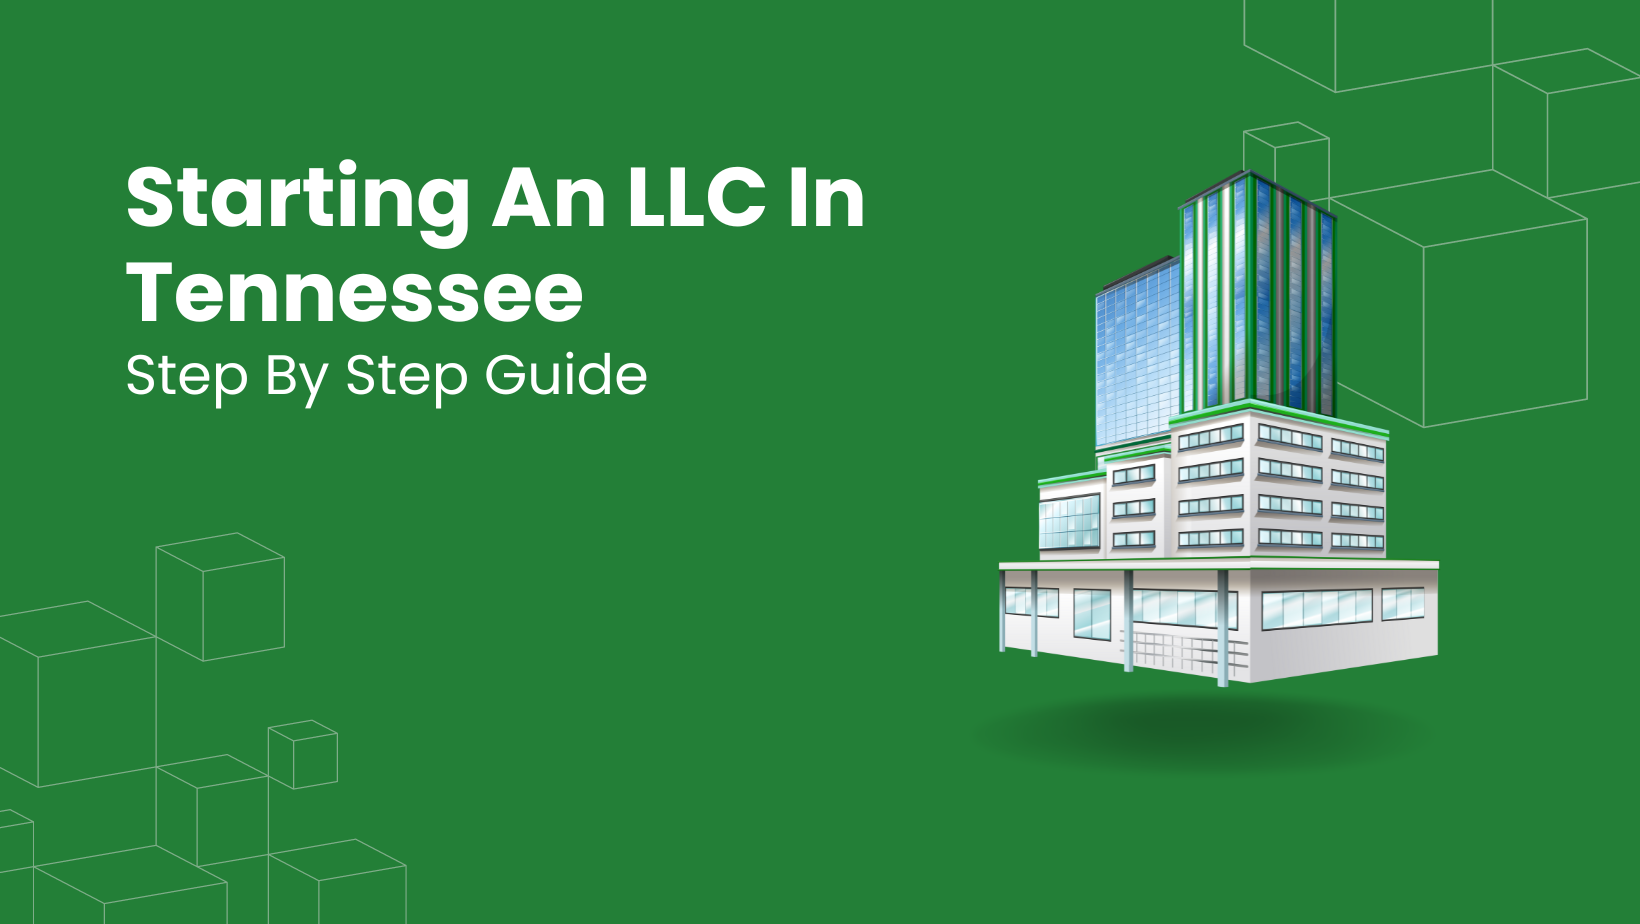 Starting An LLC In Tennessee Step By Step Guide